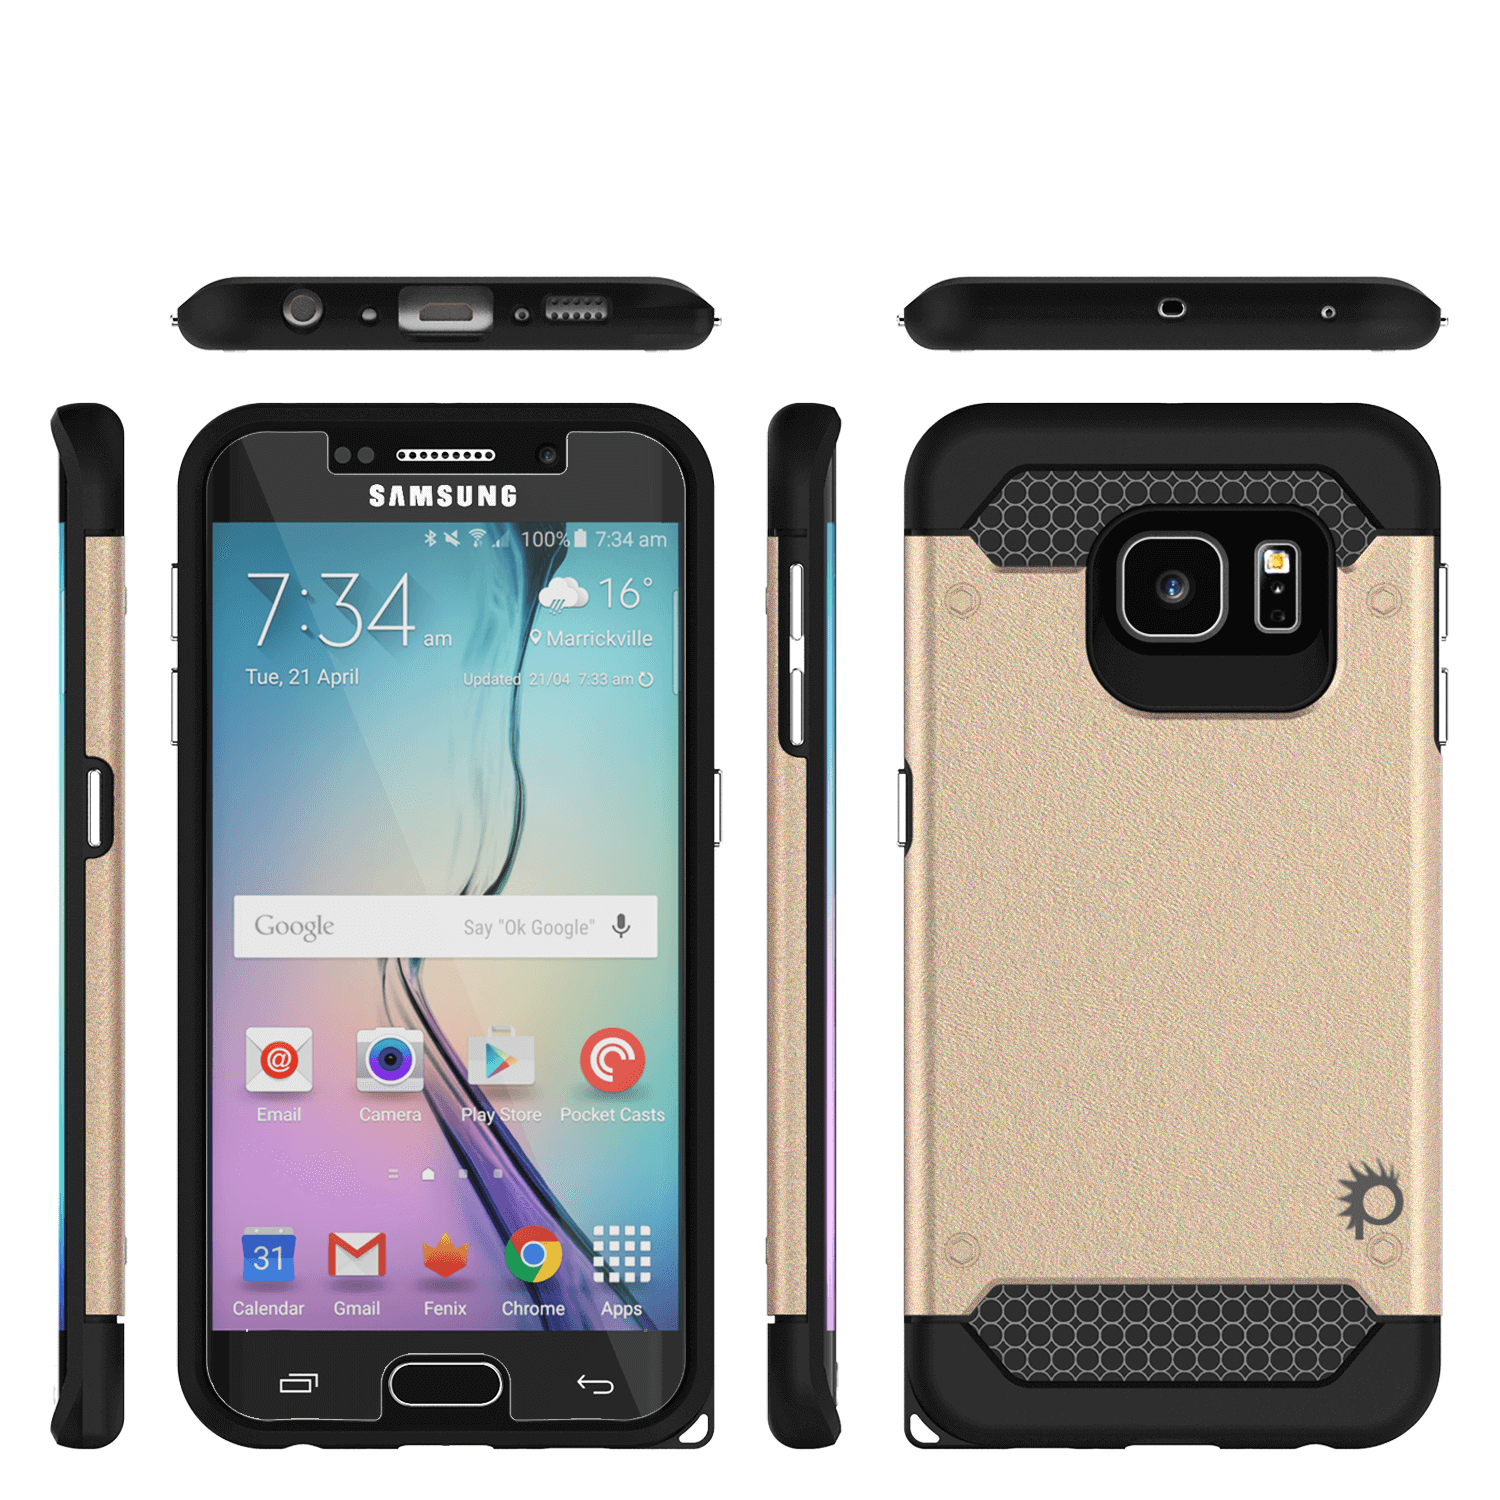 Galaxy s6 EDGE Case PunkCase Galactic Gold Series Slim Armor Soft Cover w/ Screen Protector - PunkCase NZ